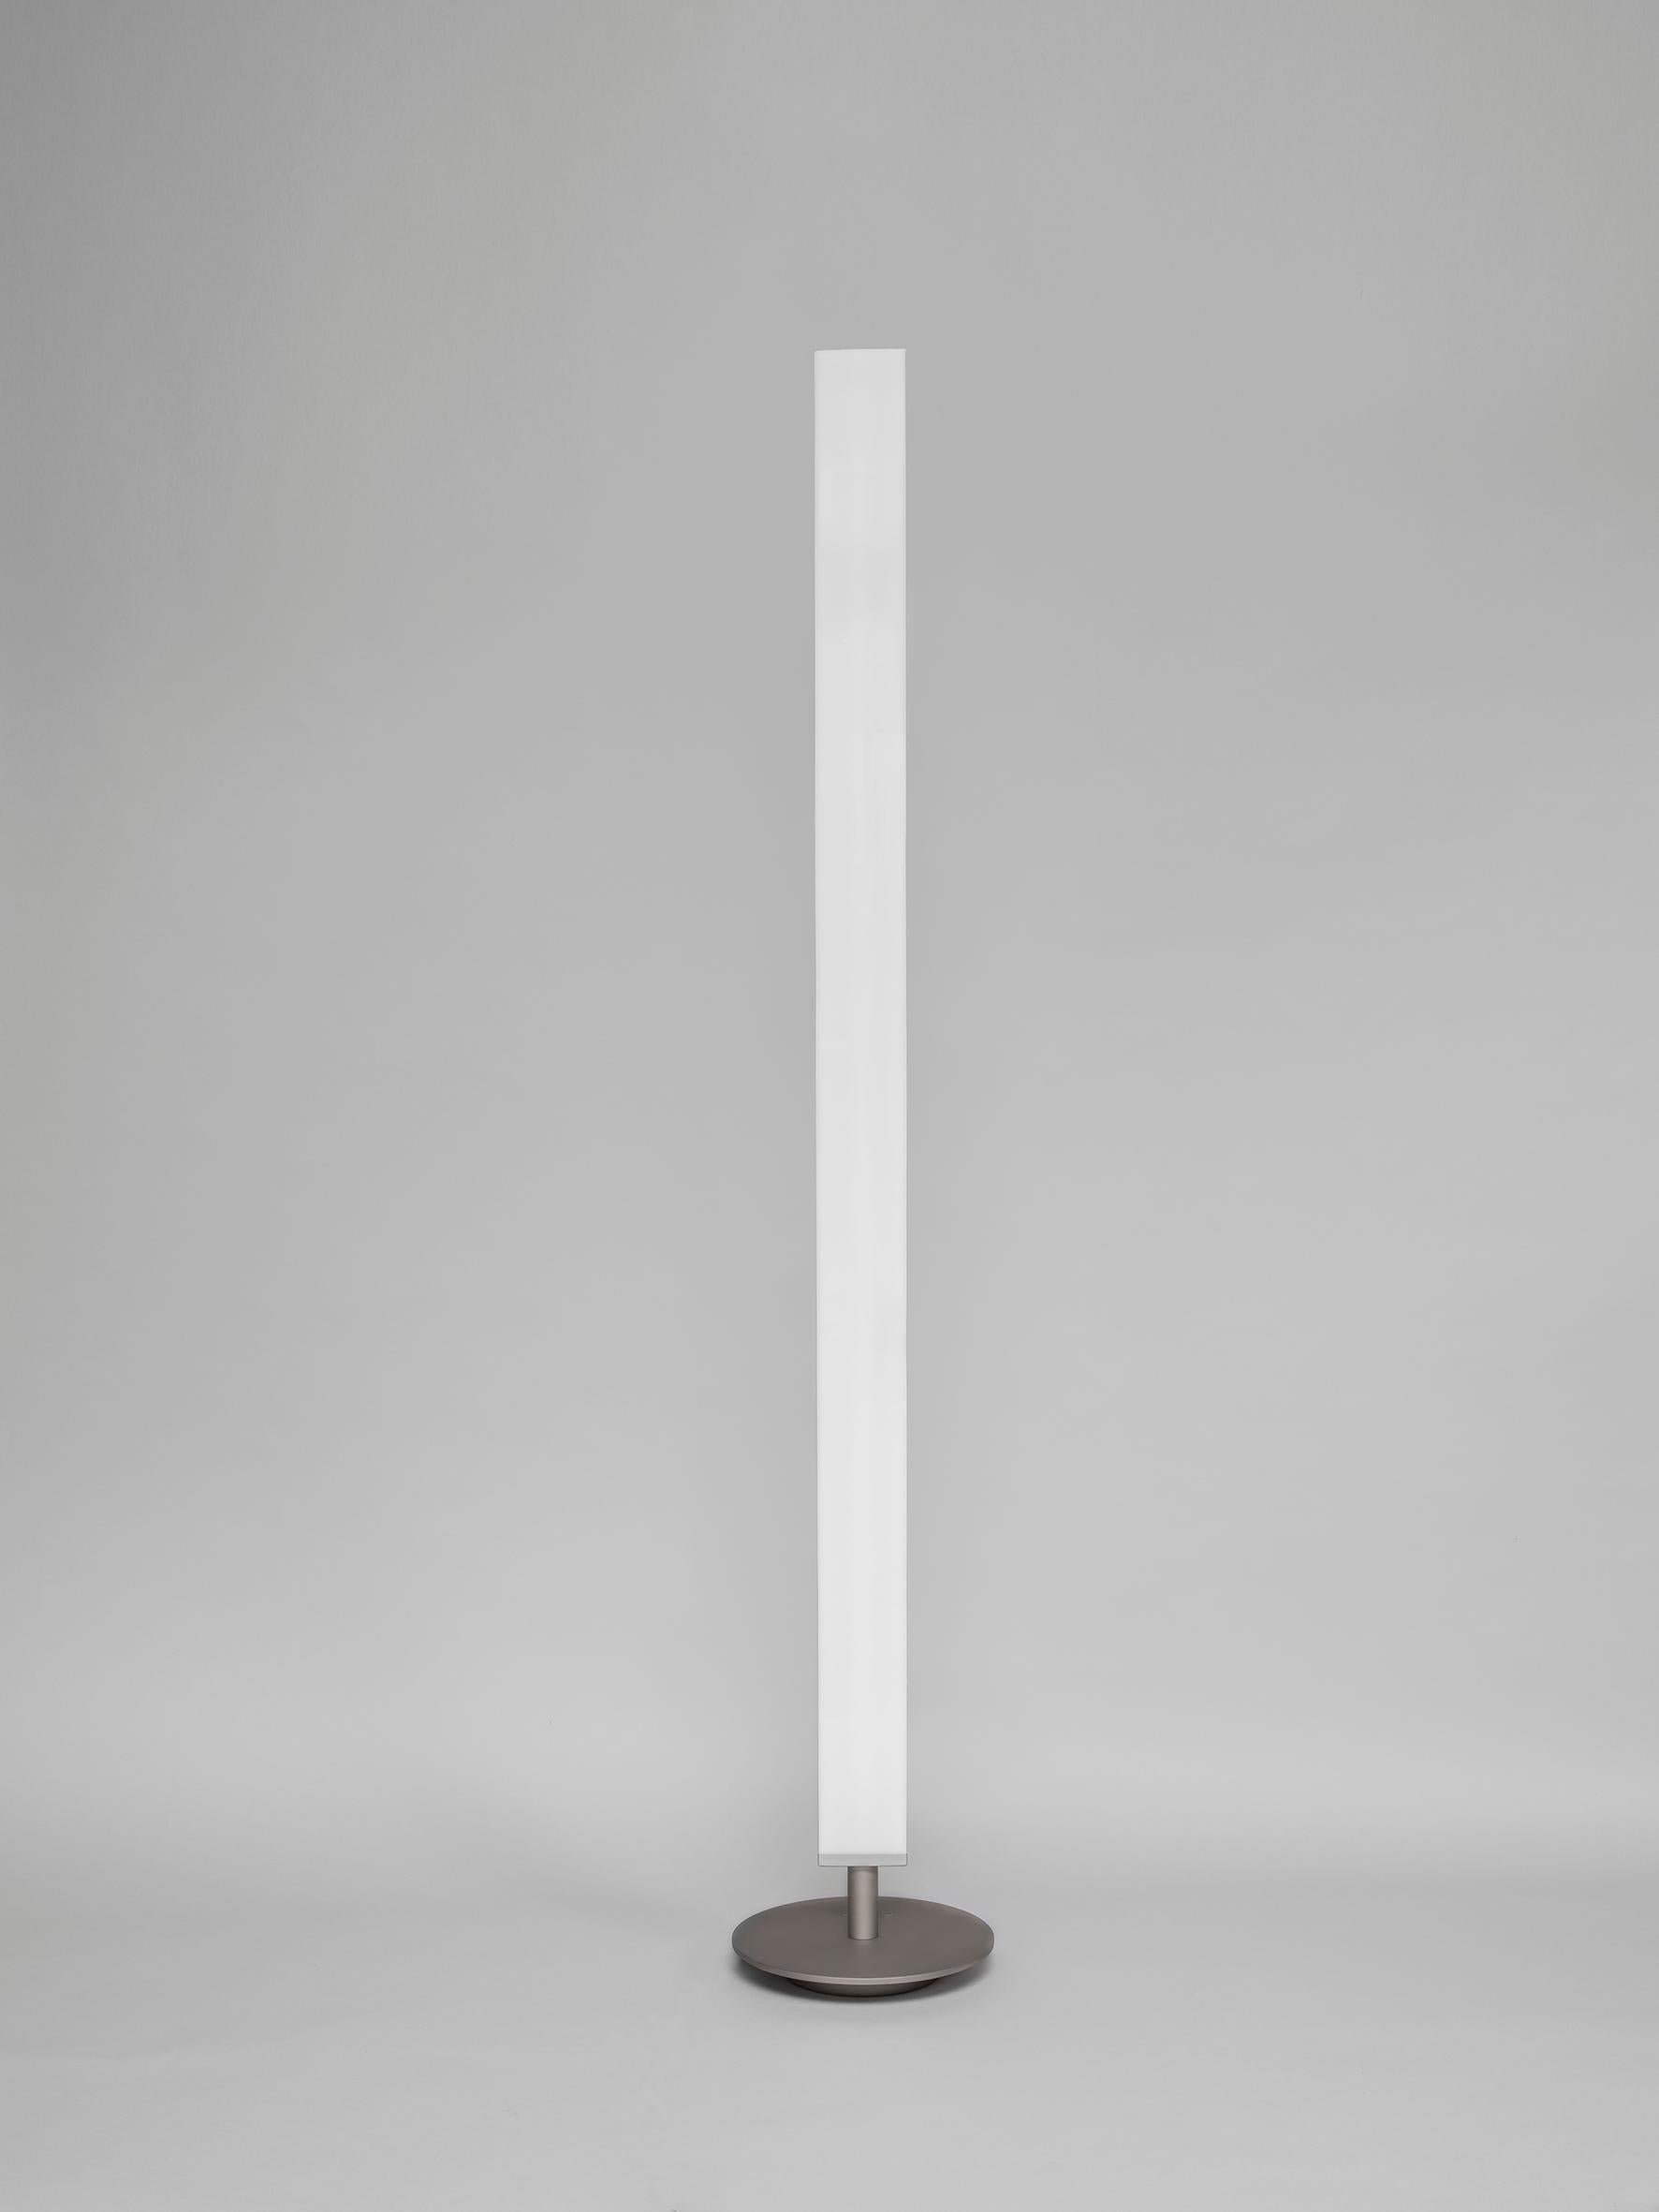 Please note that VAT is not included in the price.

Floor lamp with methacrylate diffuser to give a warm spread light through two sources of light. One indirect light and one diffused light. Simple, elegant, functional, instantly recognizable for